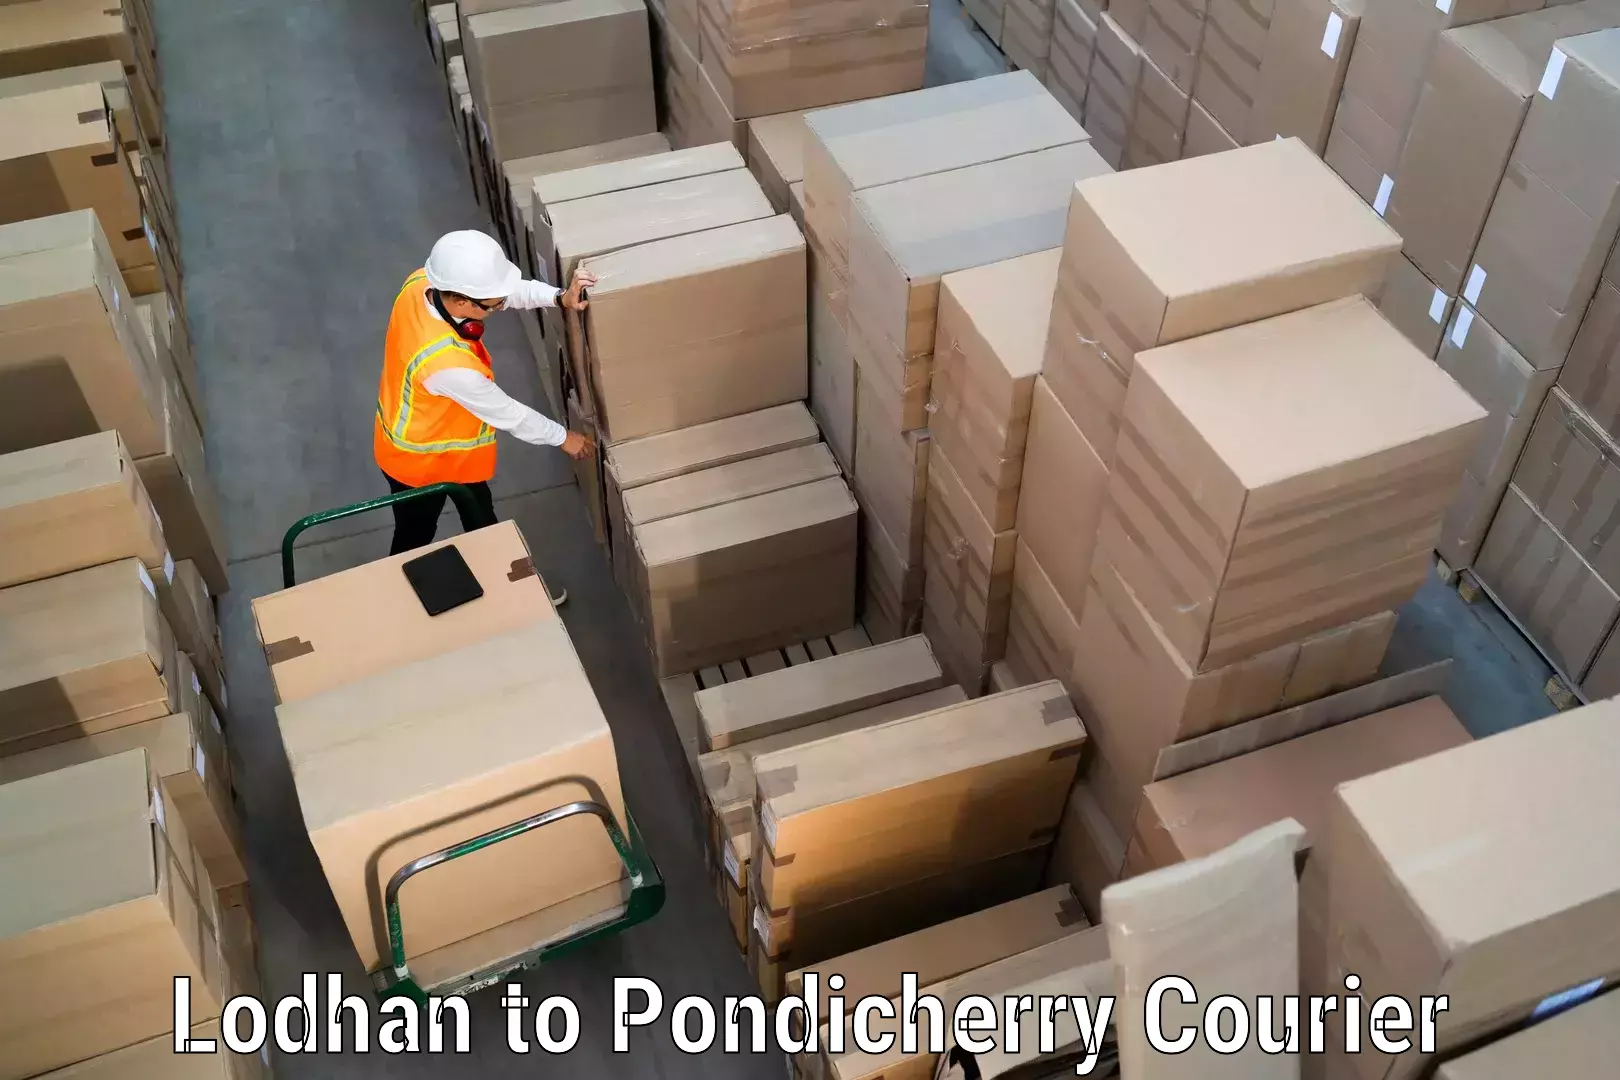 Seamless shipping experience Lodhan to Pondicherry